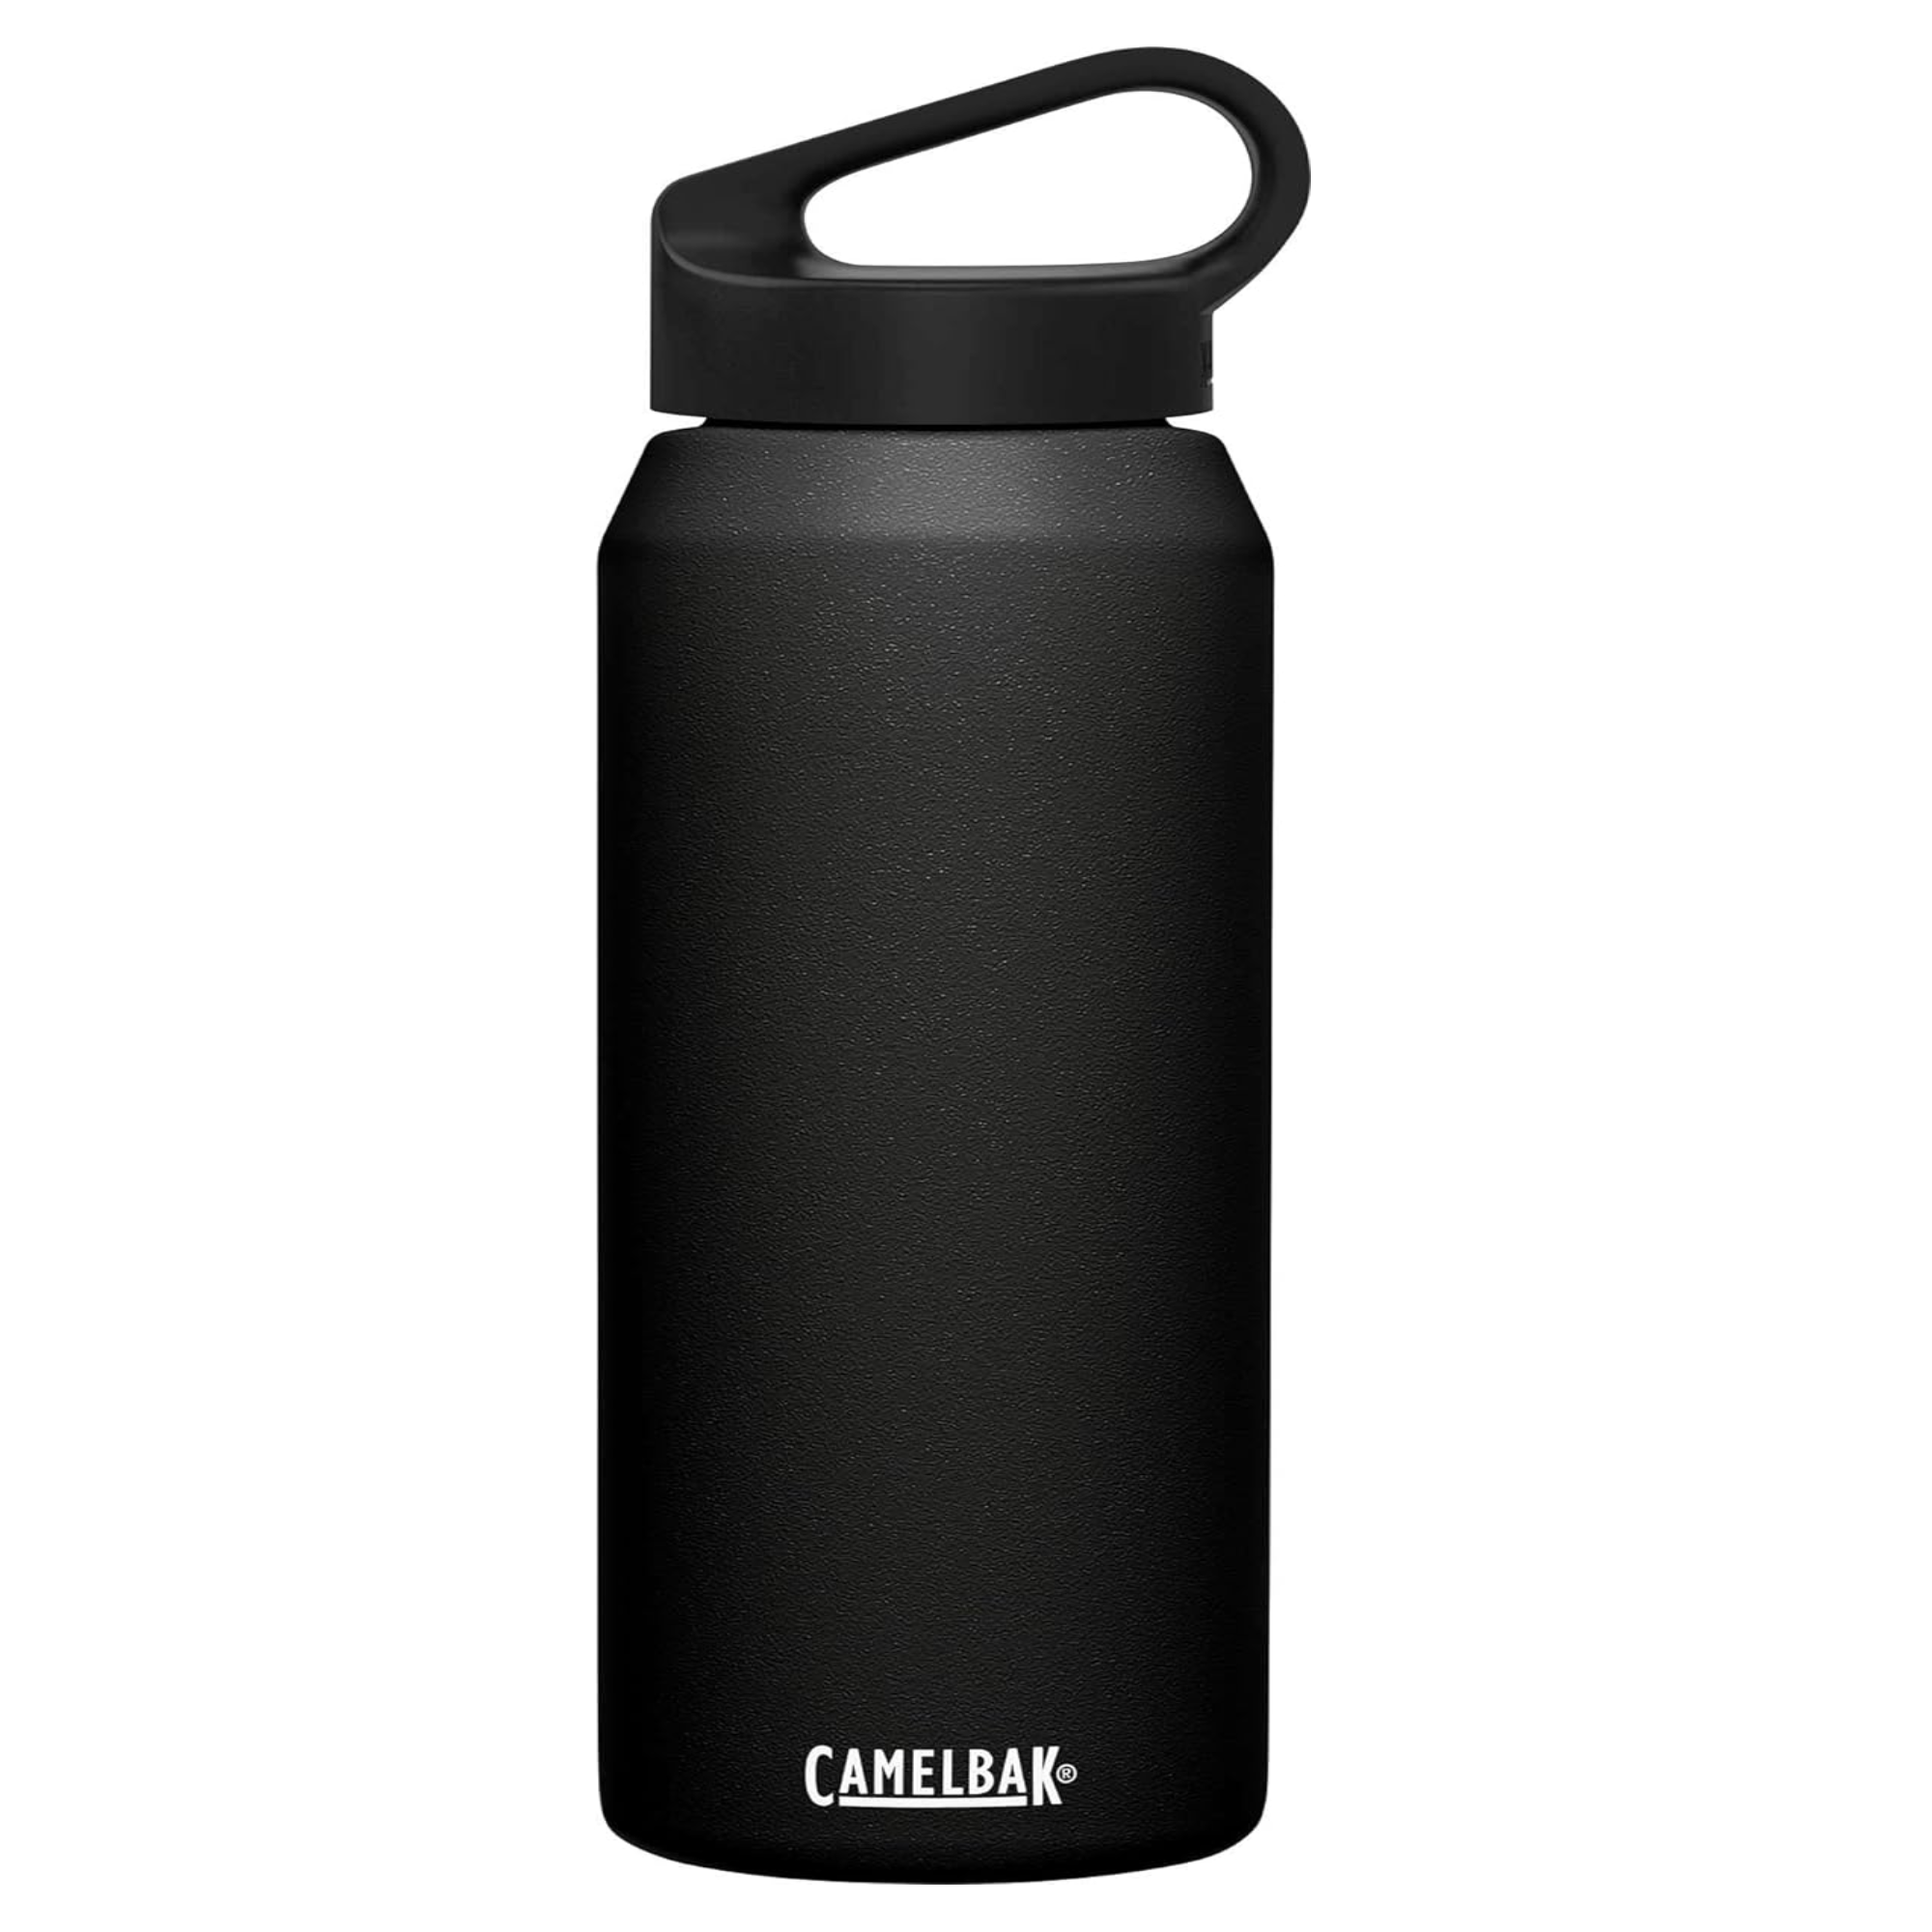 CAMELBAK VACUUM INSULATED Stainless Steel Carry Cap Water Bottle 0.6L